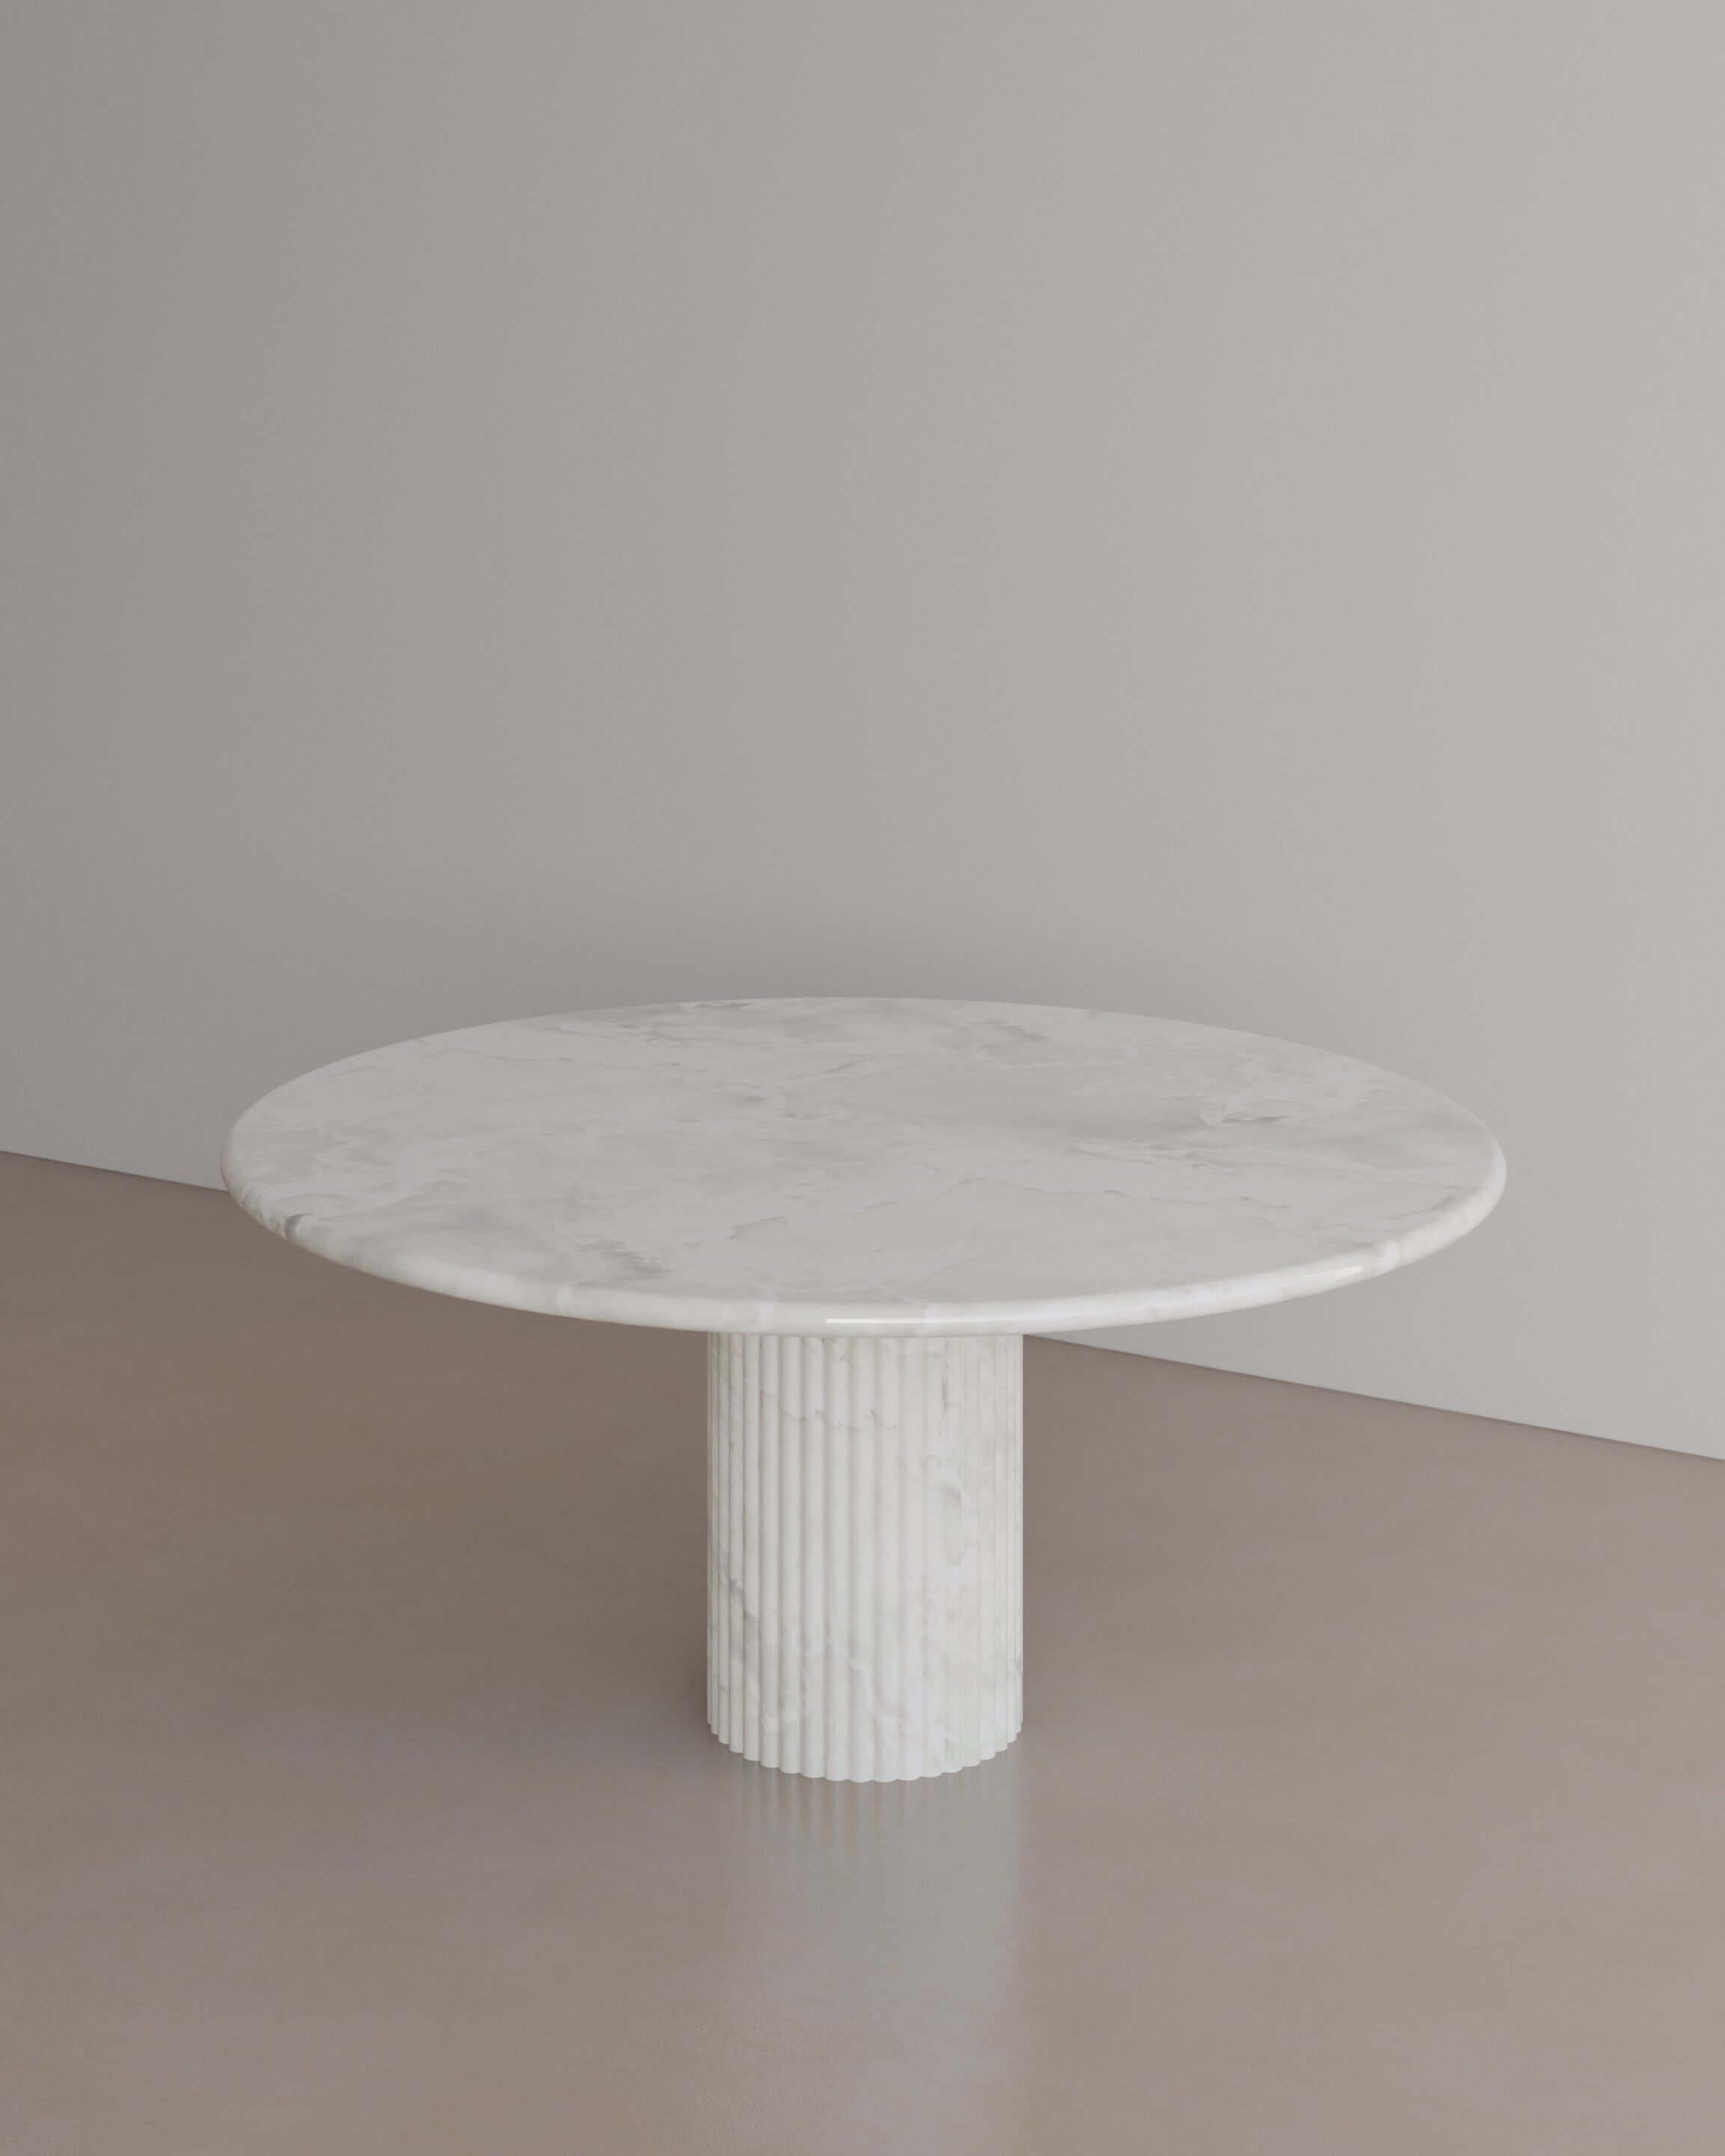 The Essentialist brings you The Antica Dining Table I in Afshar Pink Marble. An oval table top resolved by smooth bullnose edges rests on two supporting pillars. Architectural form is refined by artistic expression echoing Roman culture. This table,